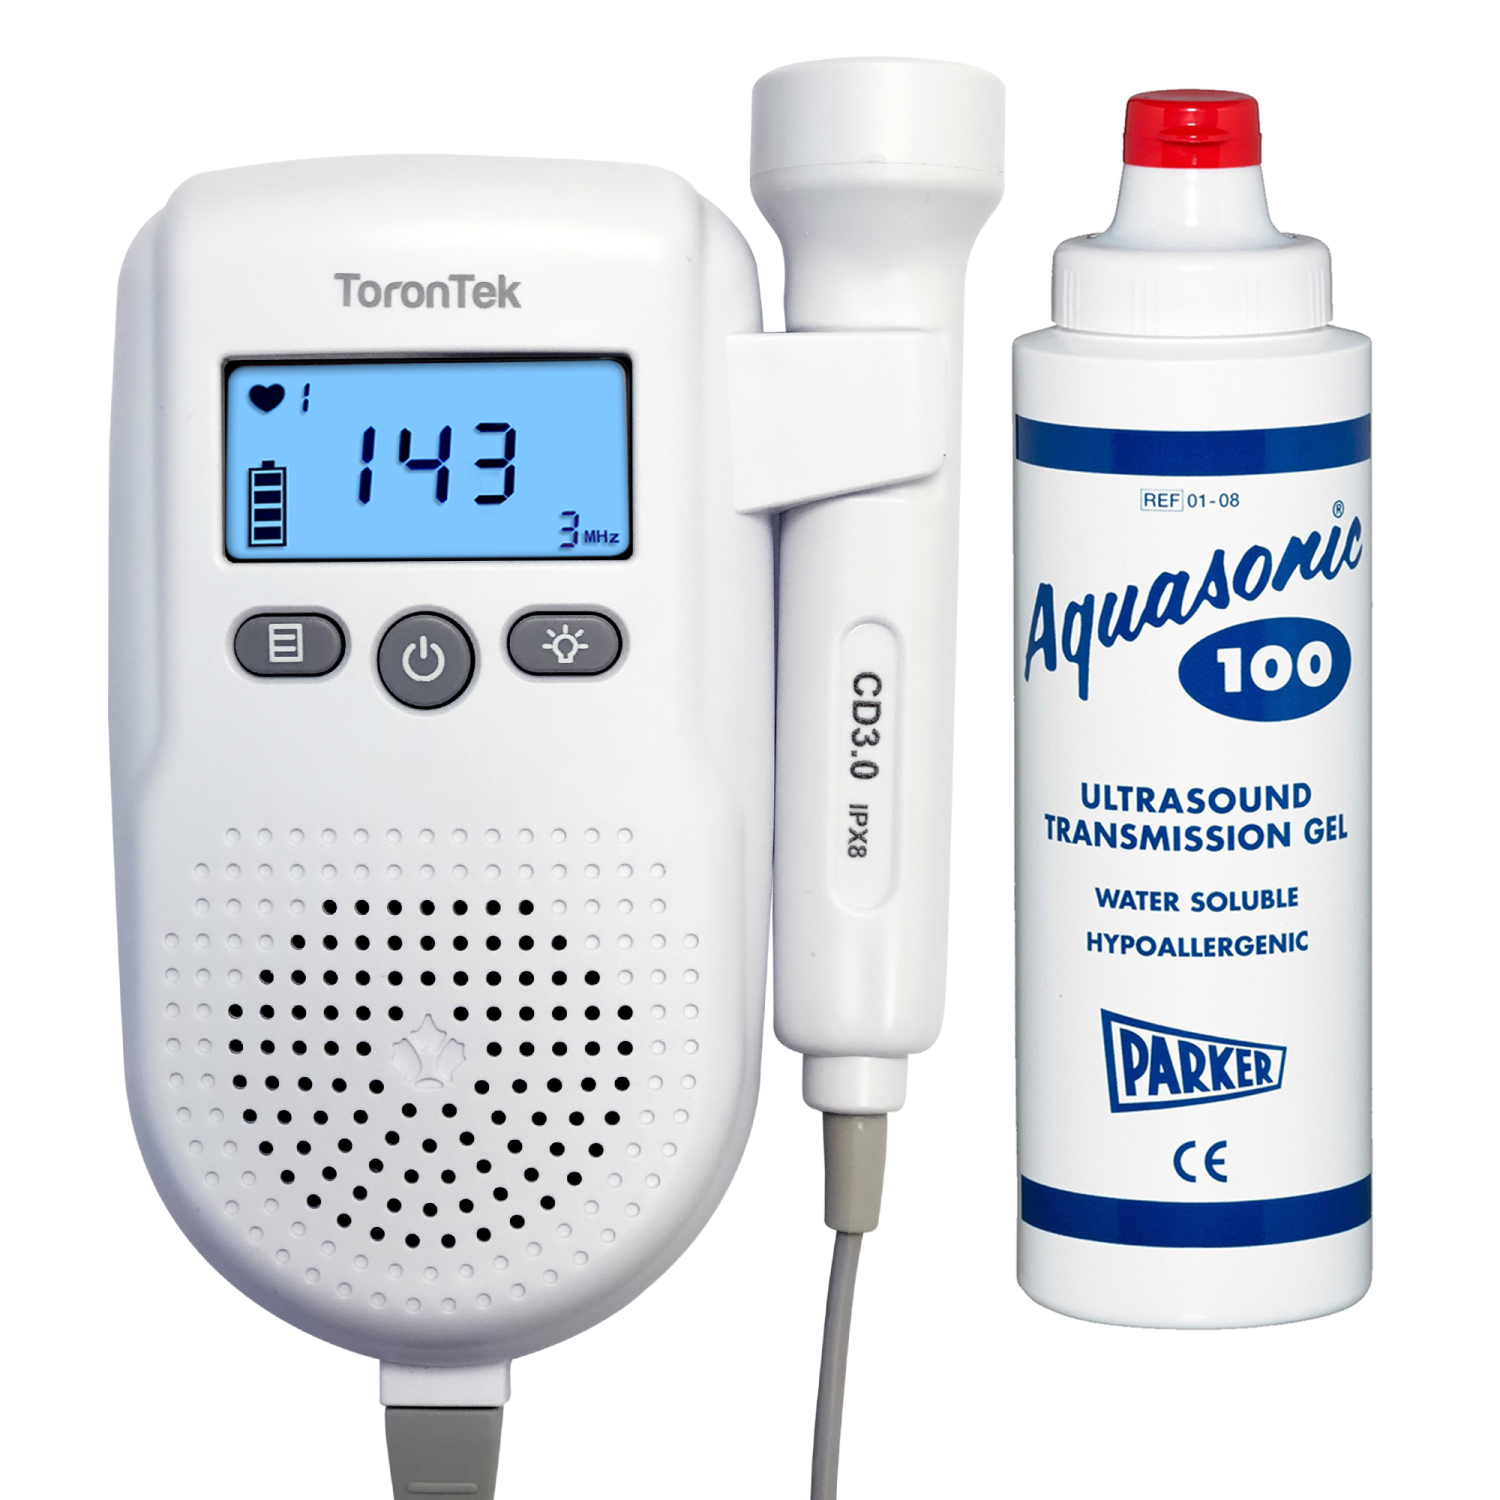 ToronTek-R88 Fetal Doppler - Leading Canadian technology with Large size gel and recording cable